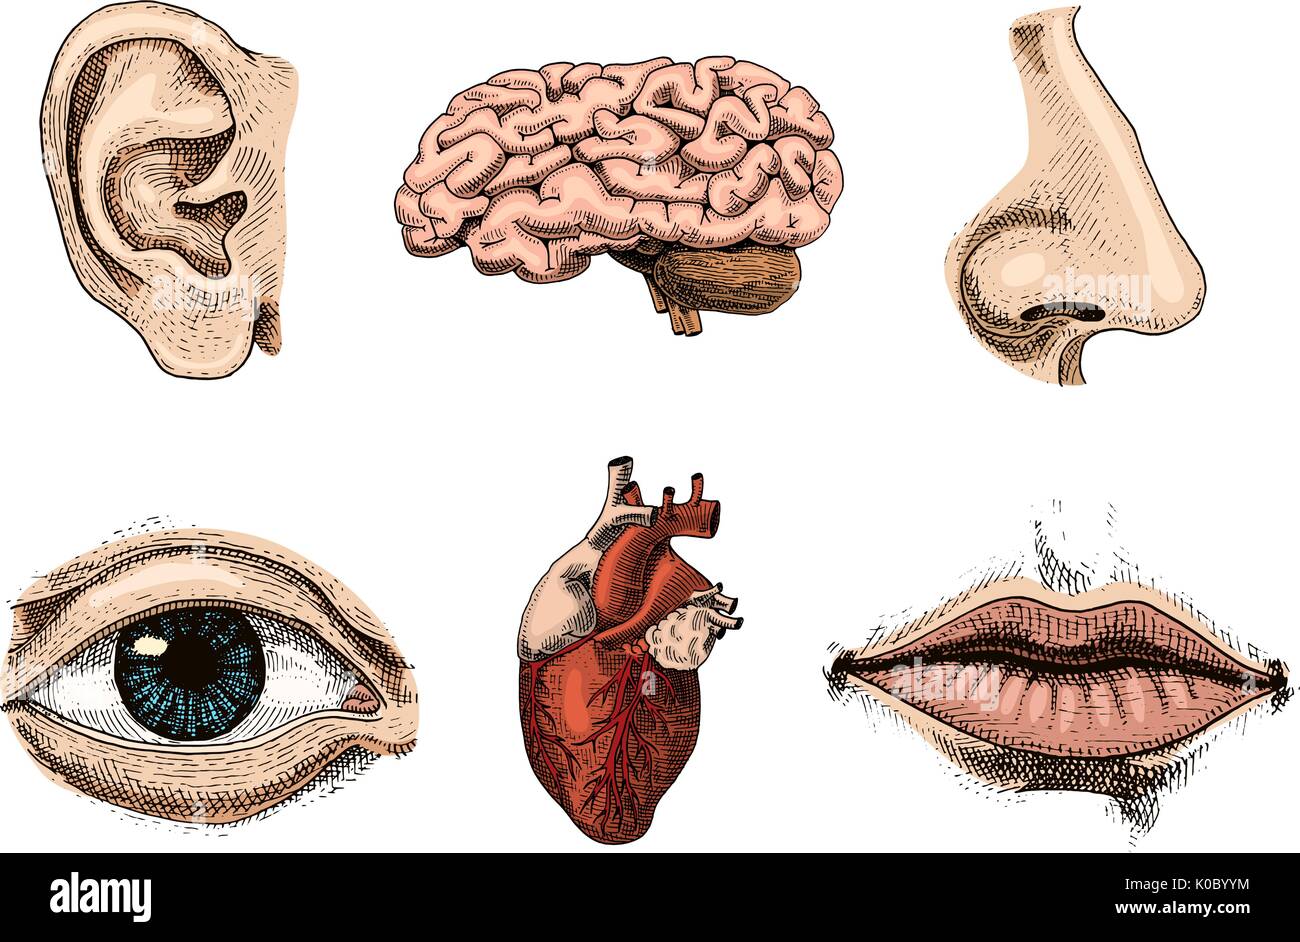 Human biology, organs anatomy illustration. engraved hand drawn in old sketch and vintage style. face detailed kiss or lips and ear, eye or view, look with nose. Stock Vector